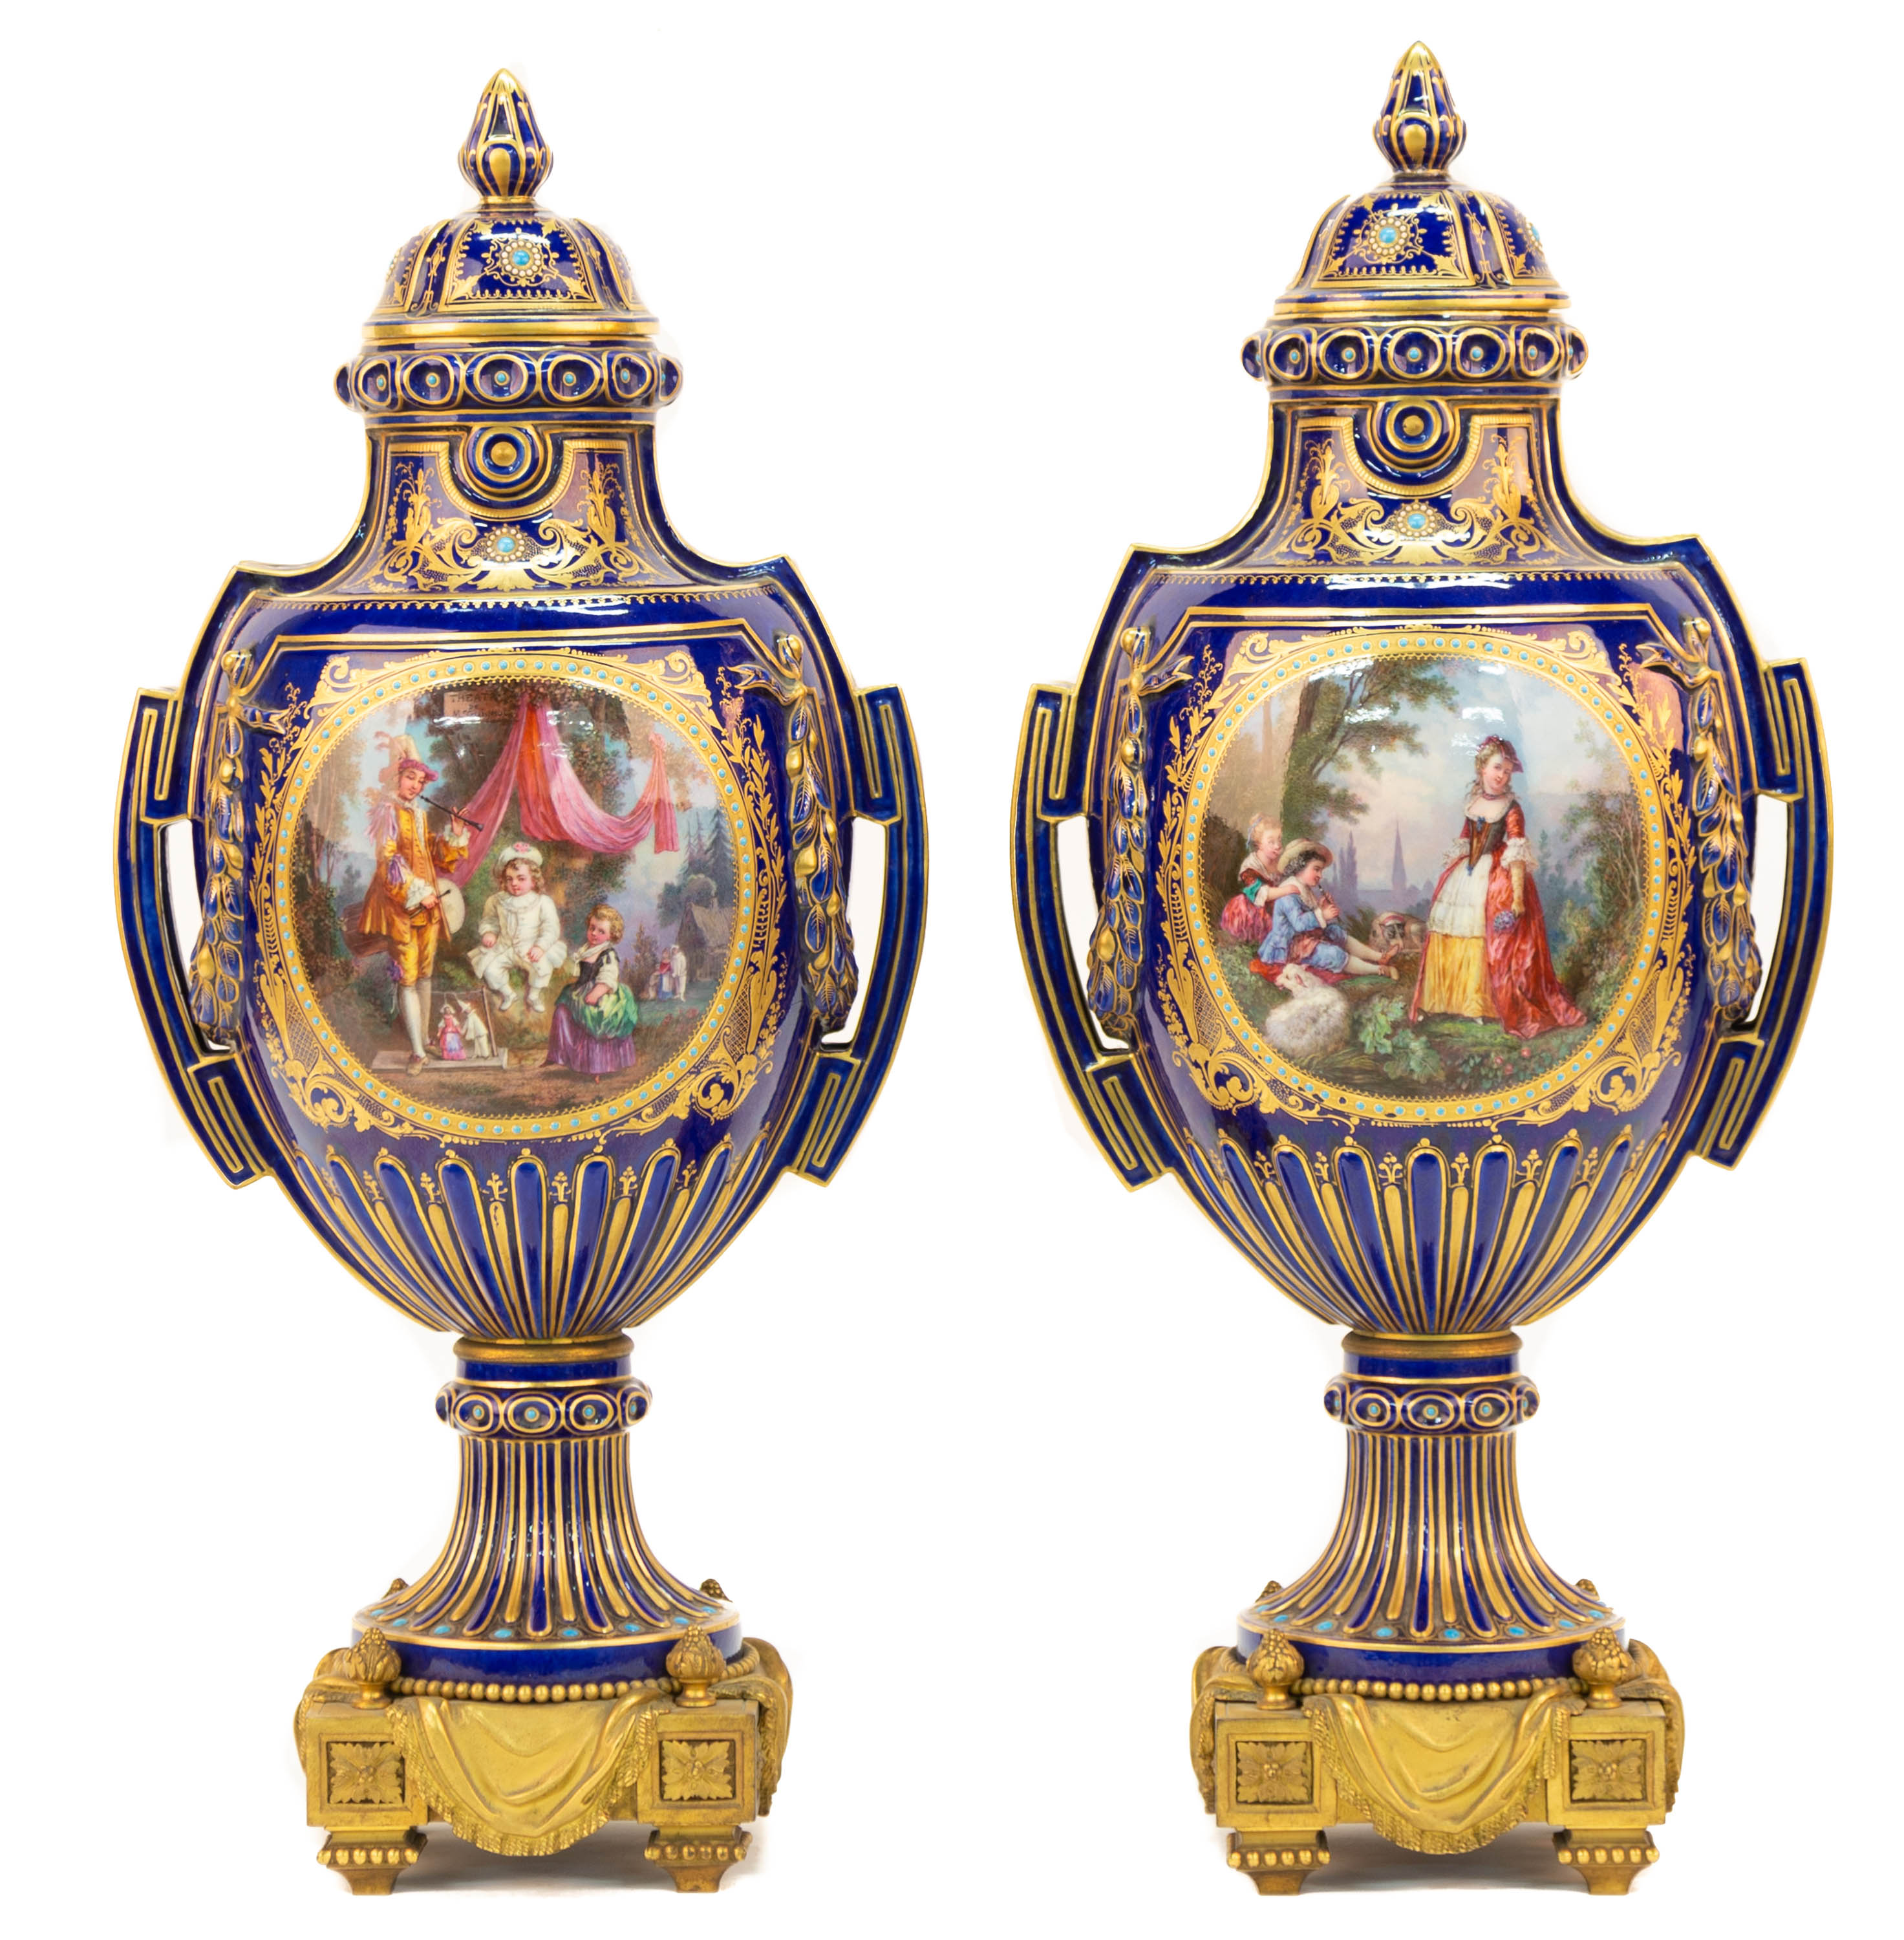 PAIR OF FINE SEVRES STYLE VASES